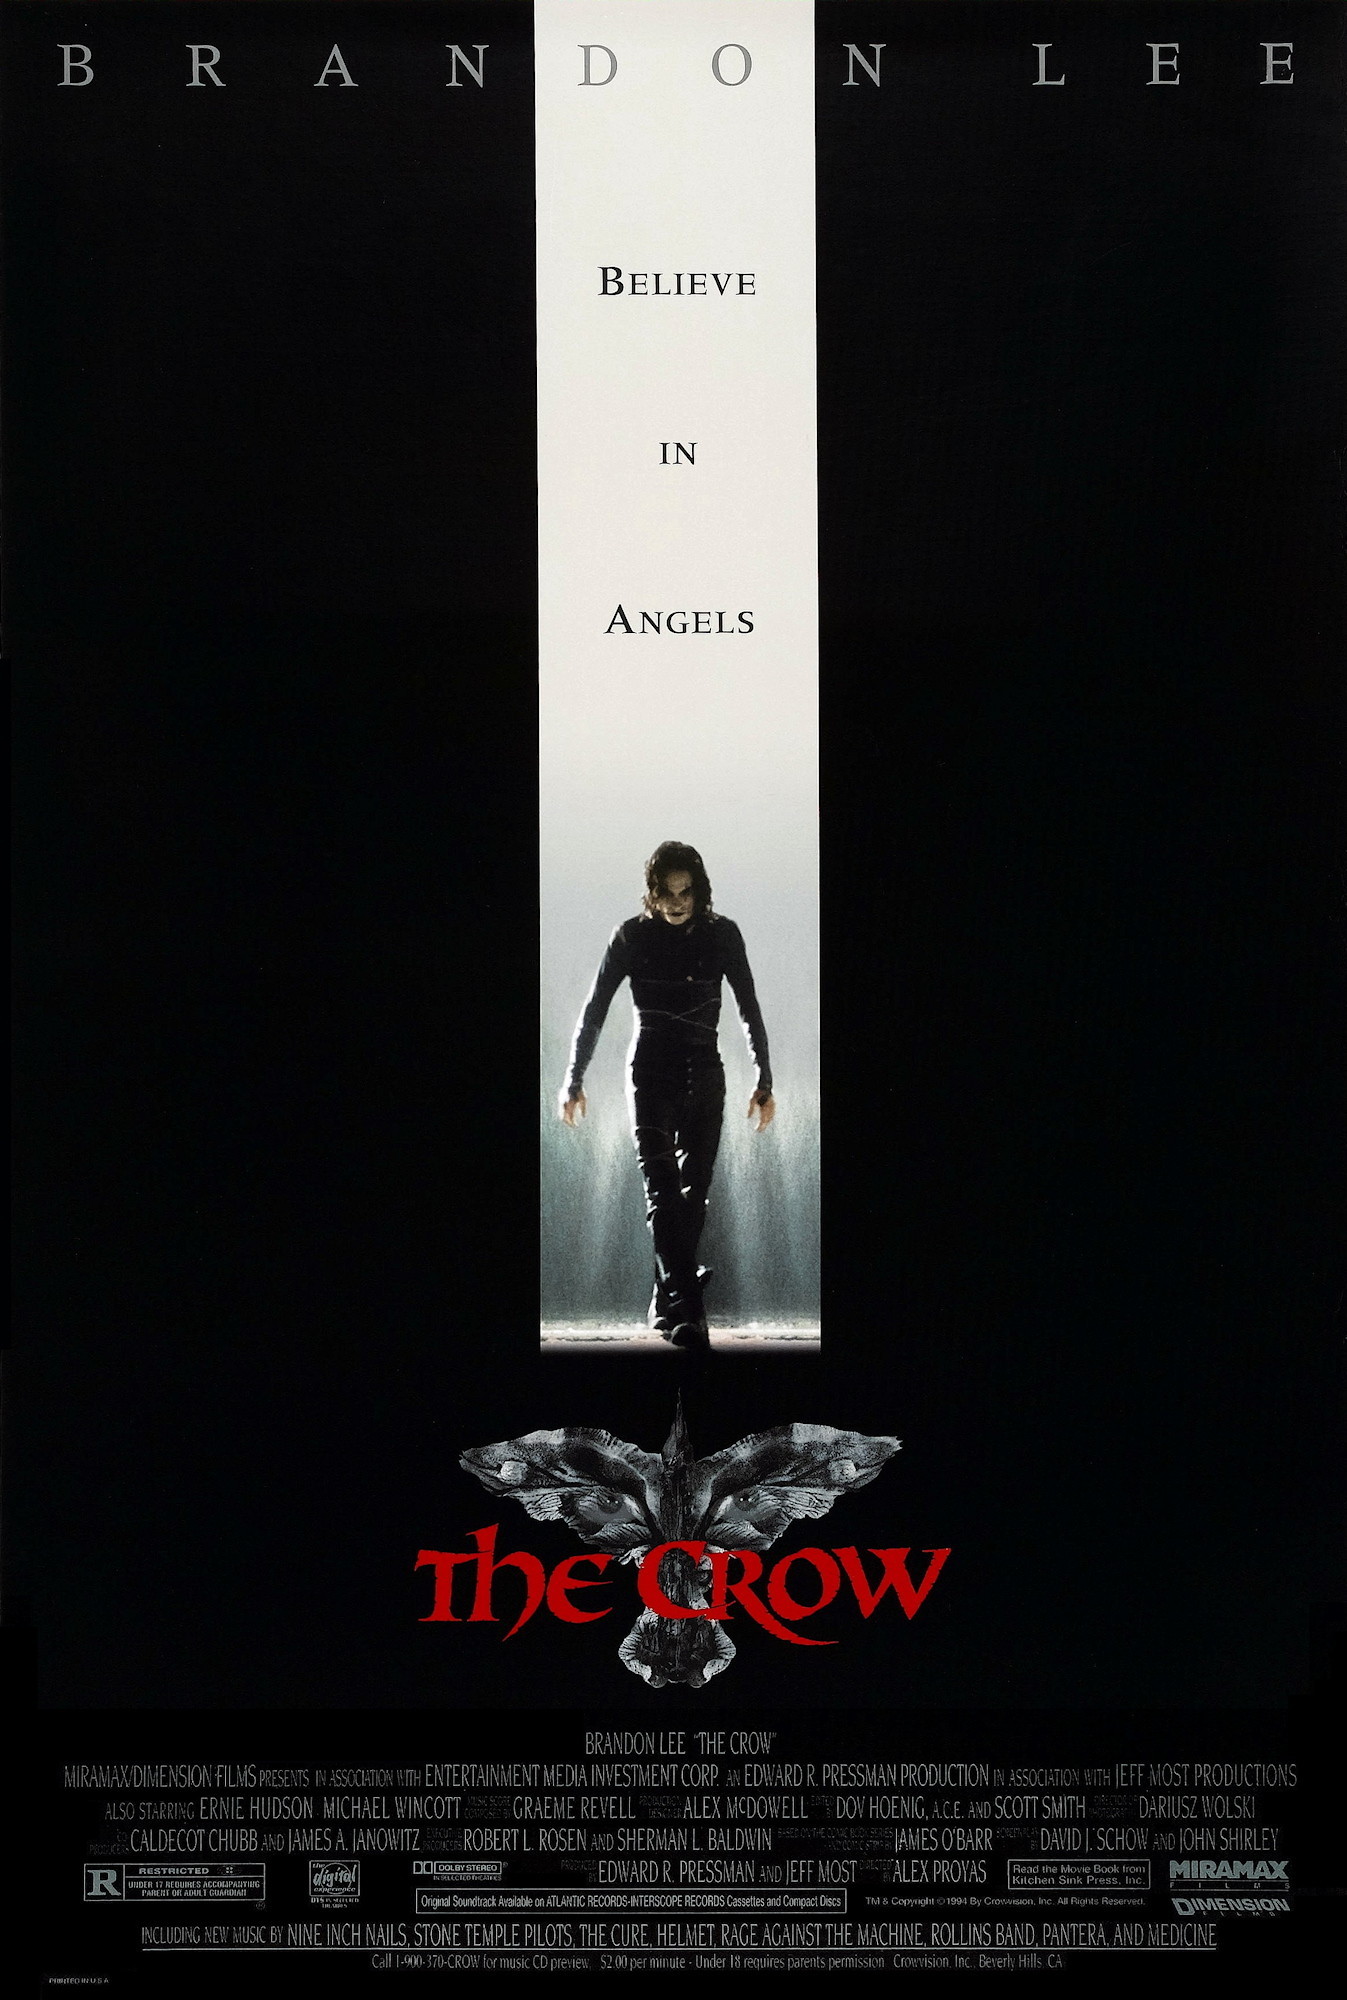 crow-poster